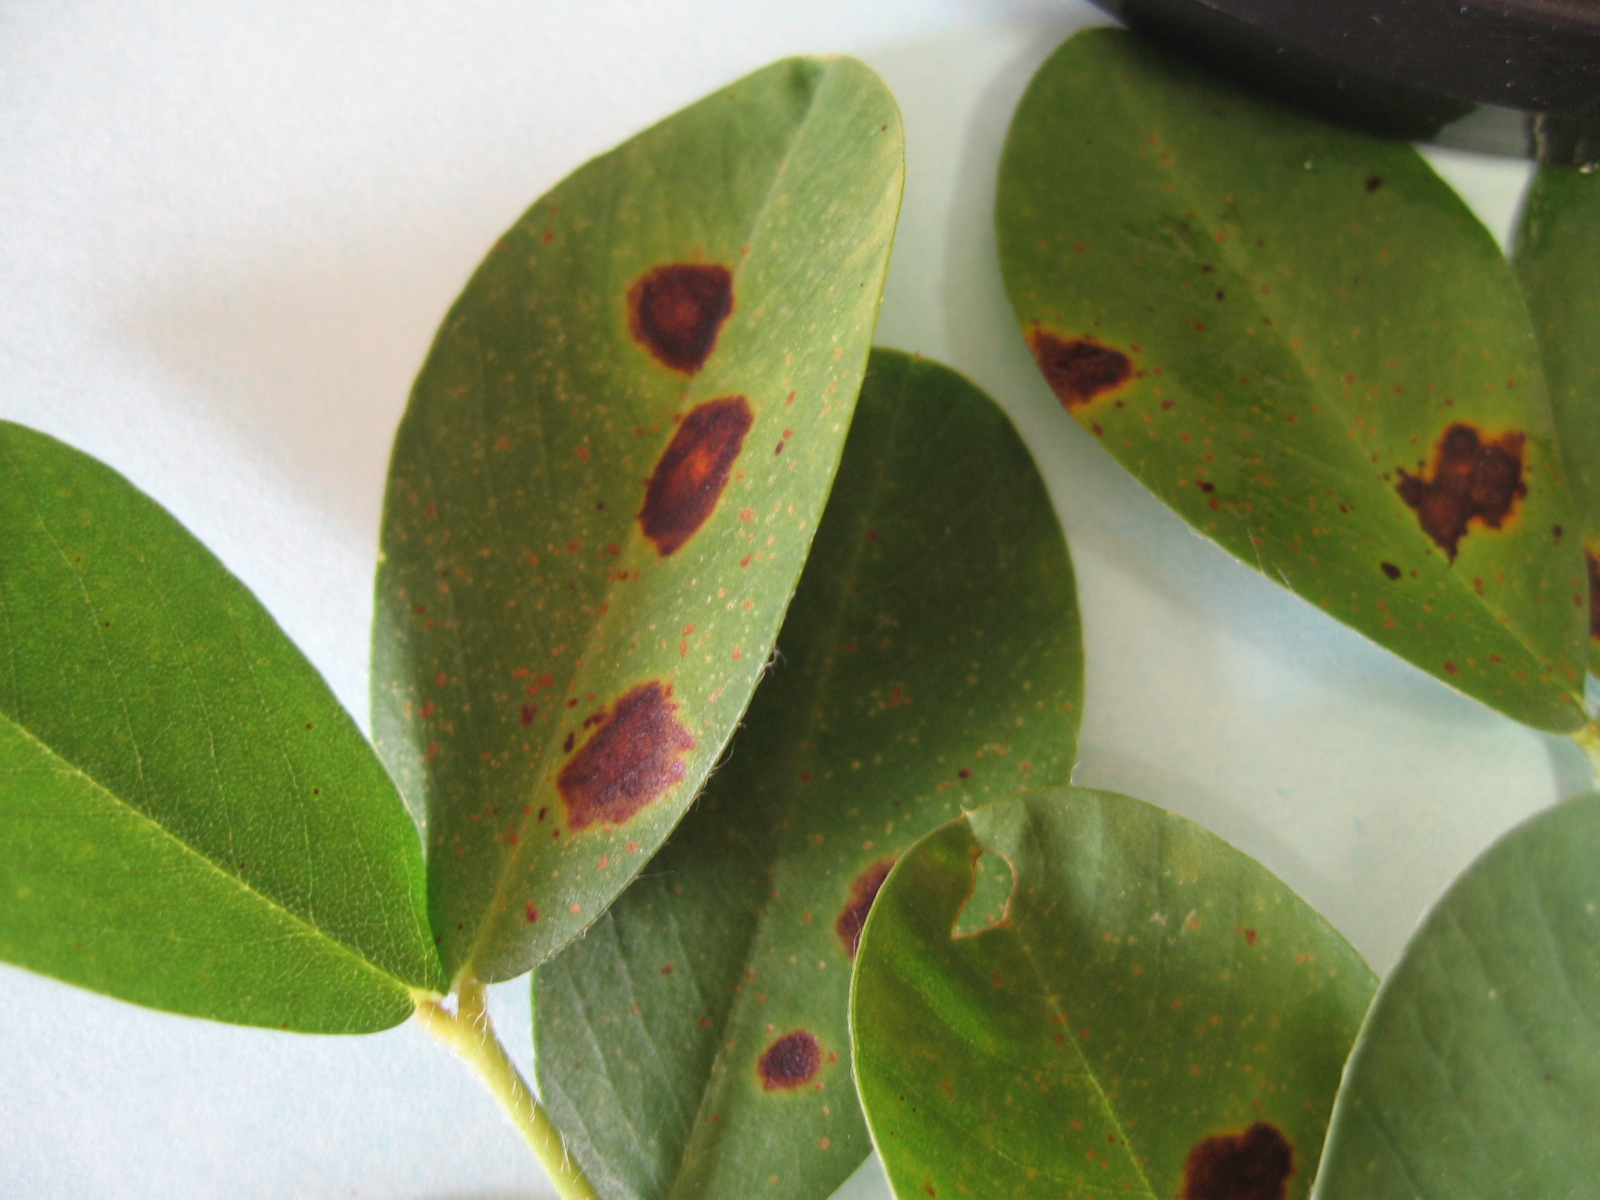 "Mysterious" leaf spot found in Suffolk, VA. At the initial stage, the spot looks like early leaf spot, but it has non-pathogenic origin.